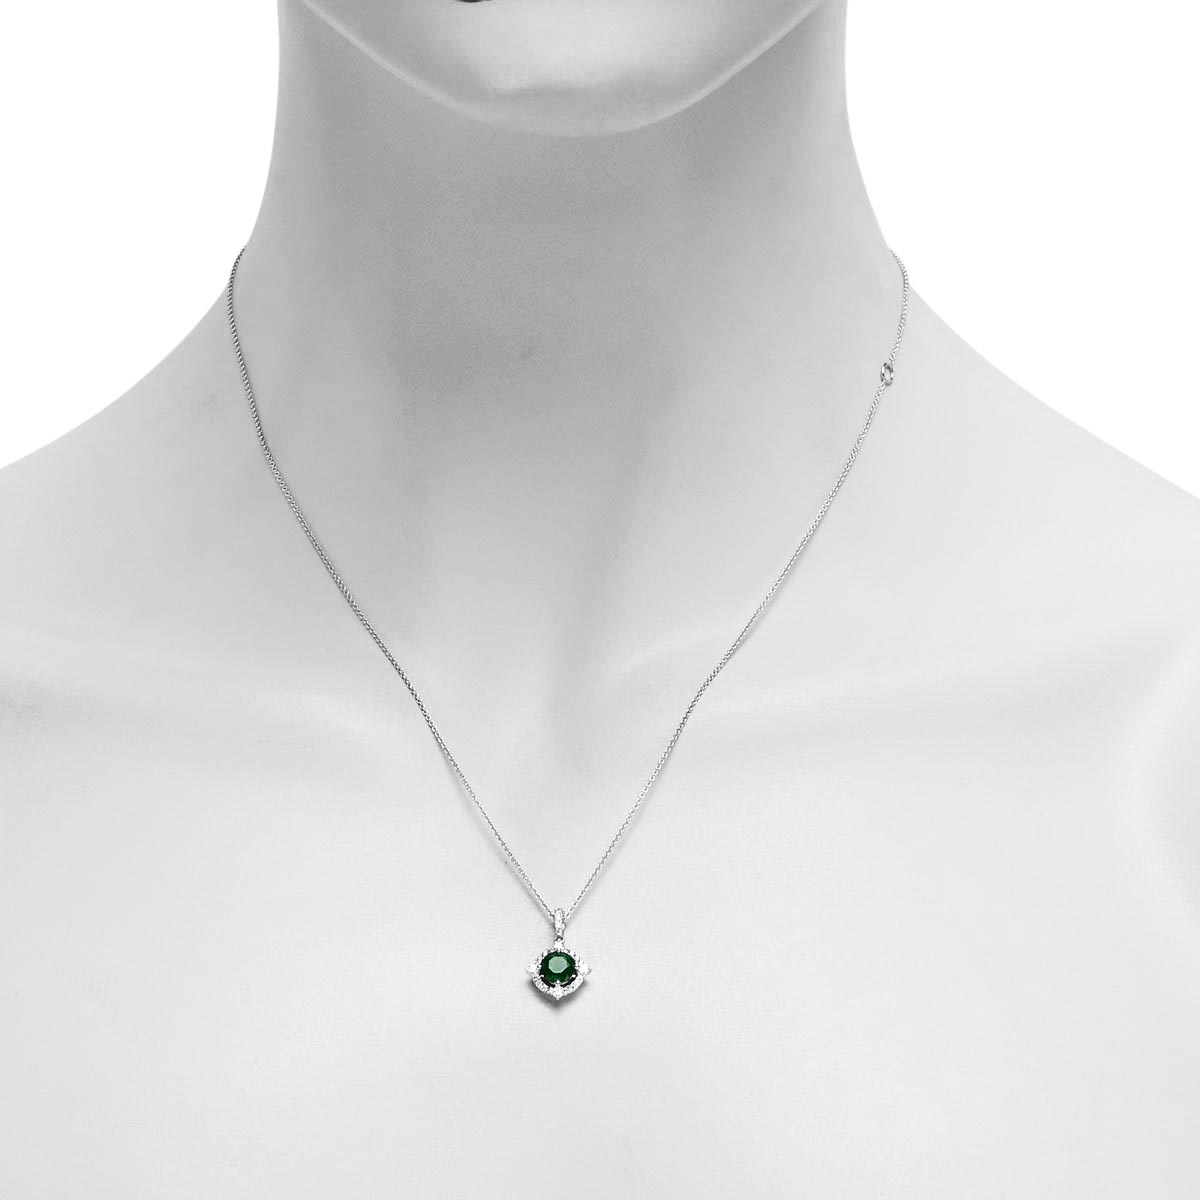 Emerald Necklace in 14kt White Gold with Diamonds (1/4ct tw)